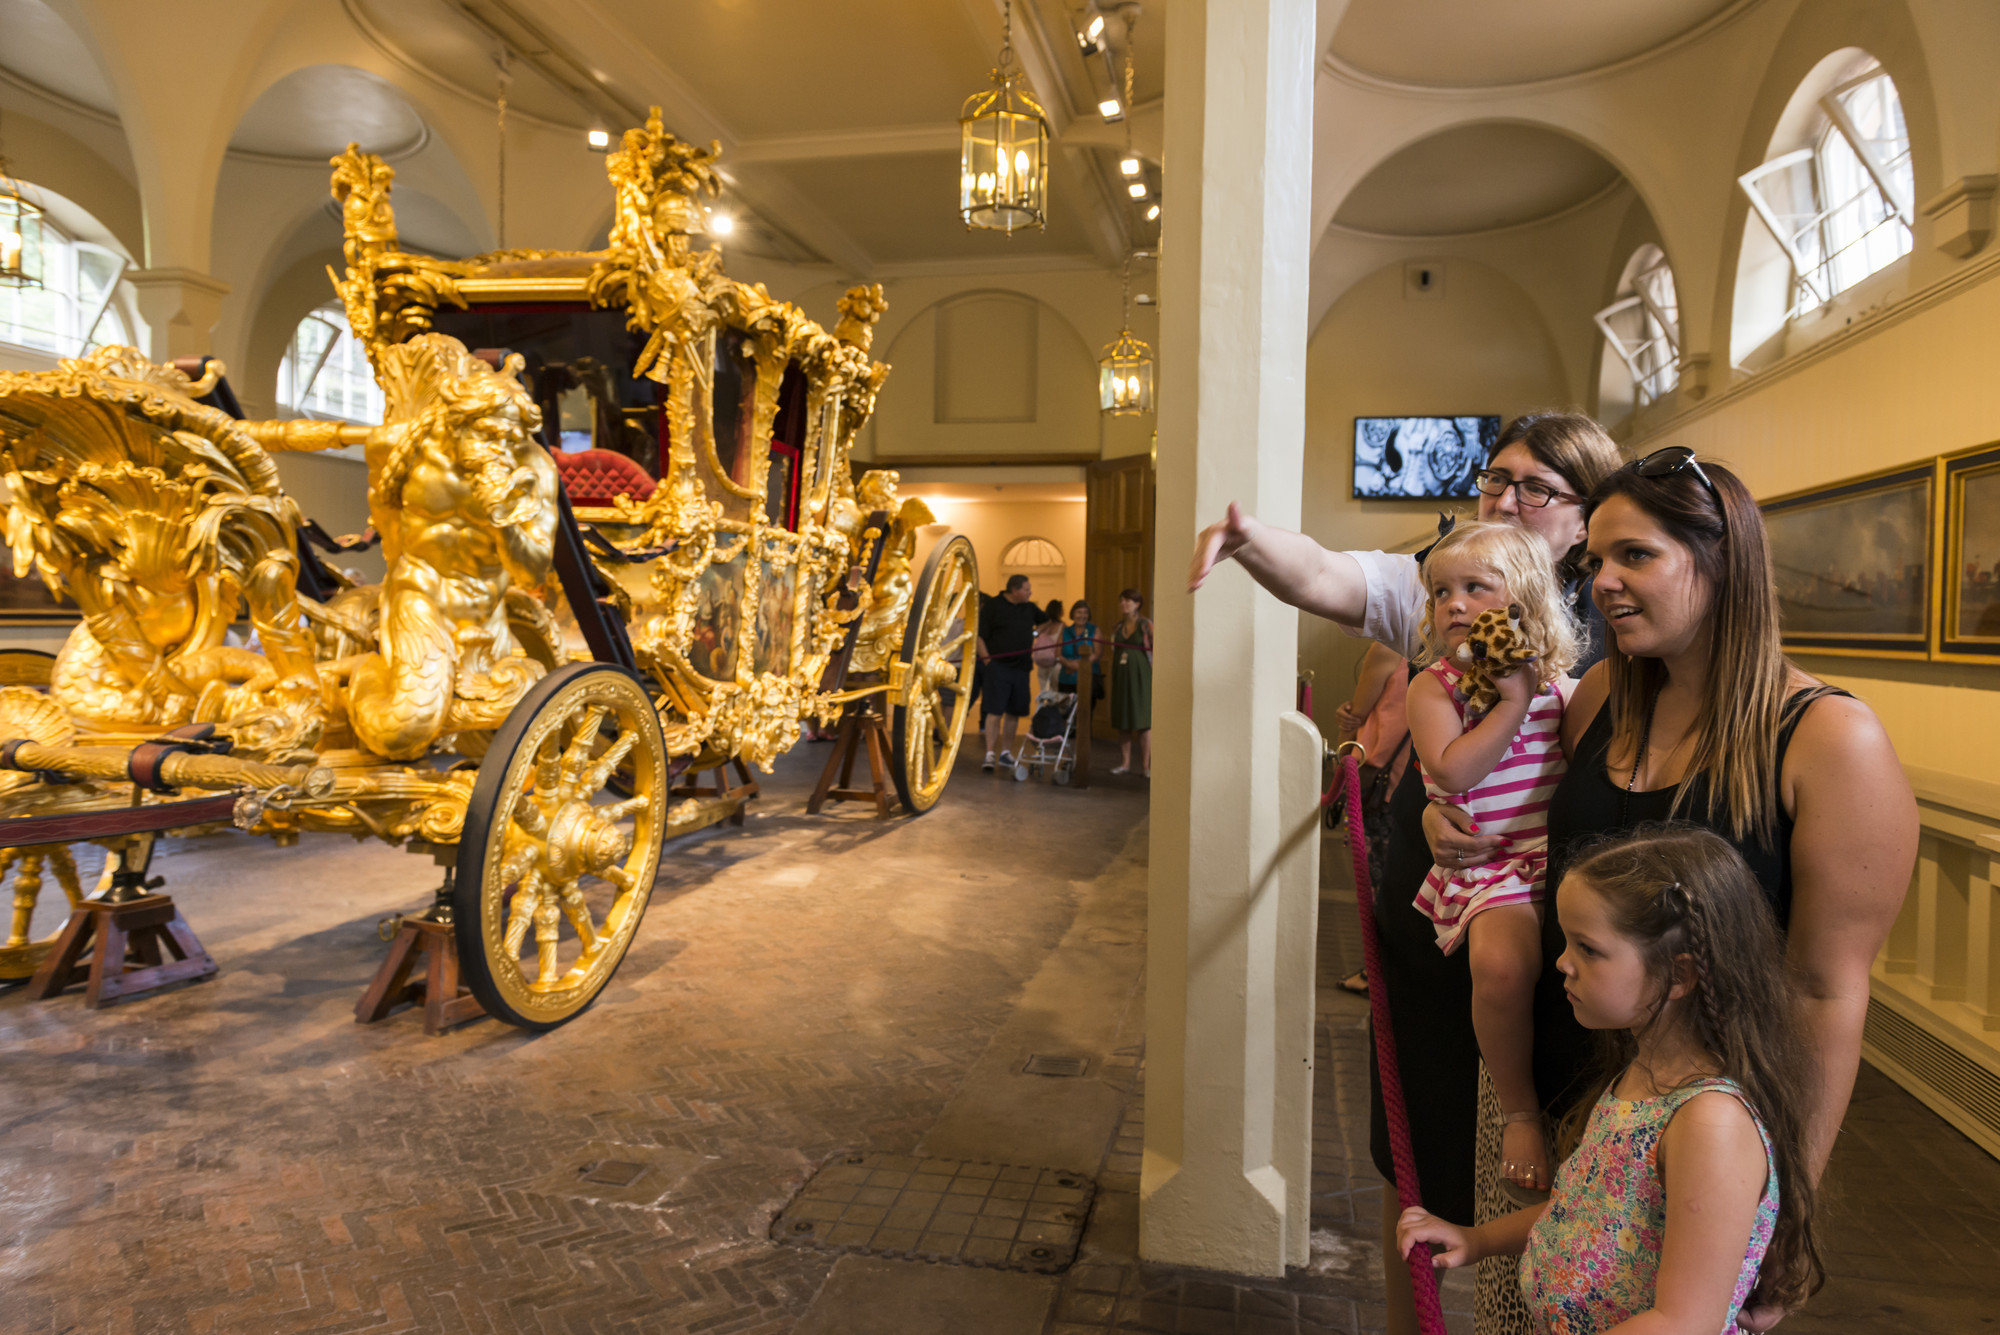 A family of a woman and two small children stand by the Gold State Coach, with the warden showing them interesting points of the Coach